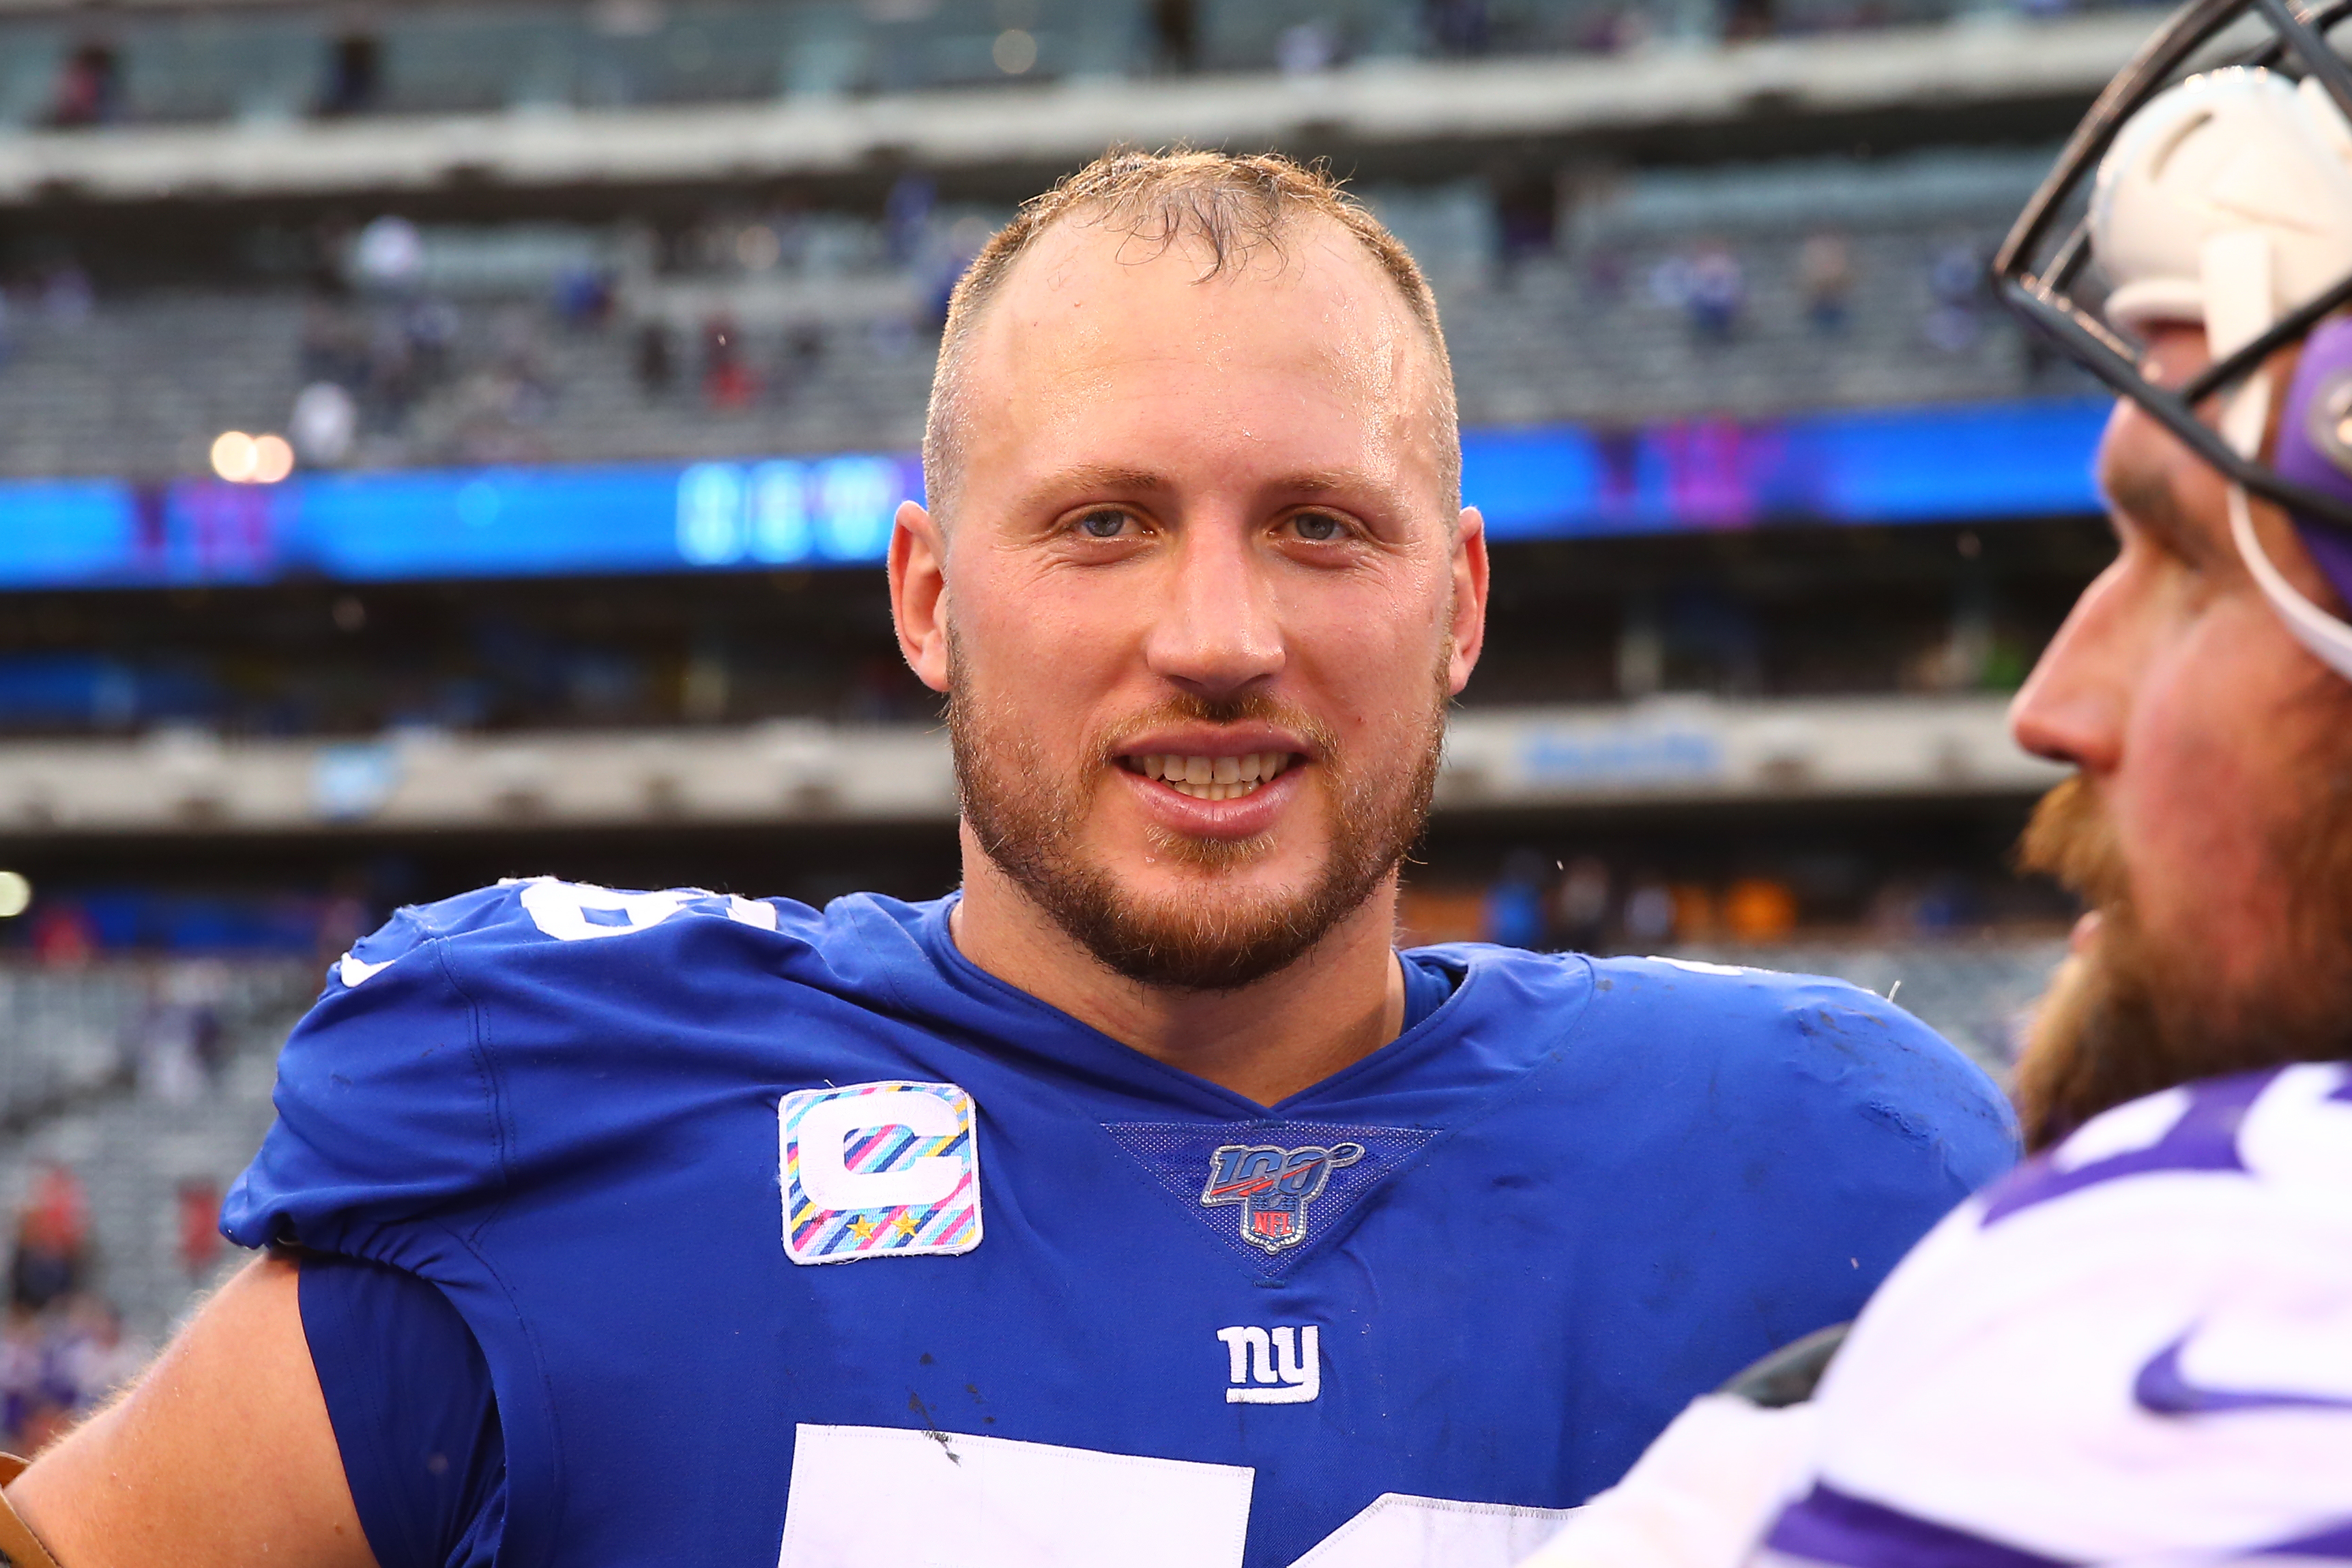 New York Giants offensive tackle Nate Solder speaks to the media in 2019